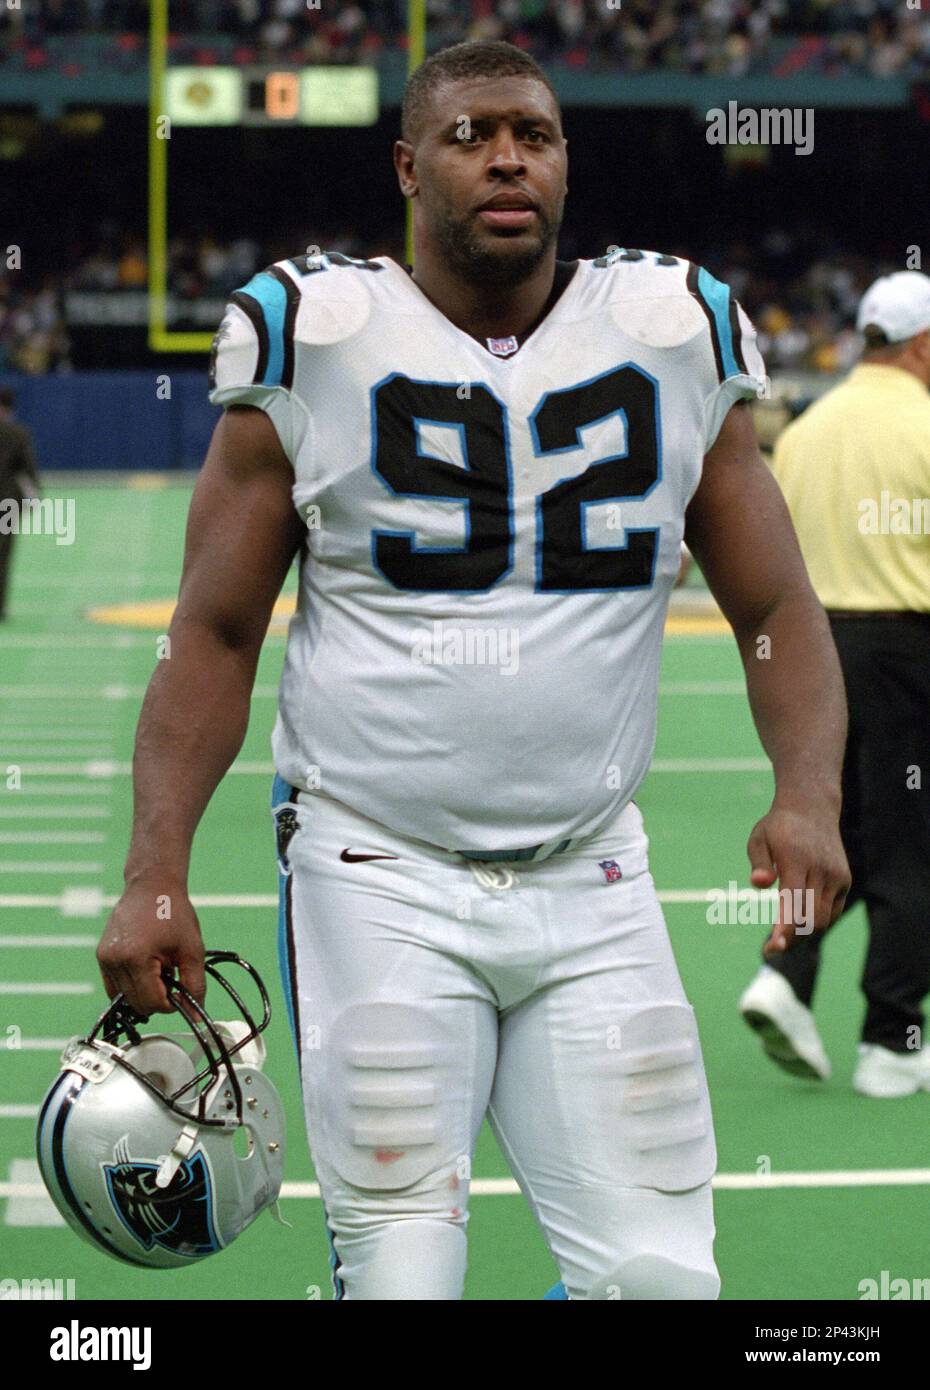 NFL FILE 2000: Reggie White of the Carolina Panthers. After White retired  after the 1998 season, the Panthers wooed White back for one final season  in 2000 which he started all 16